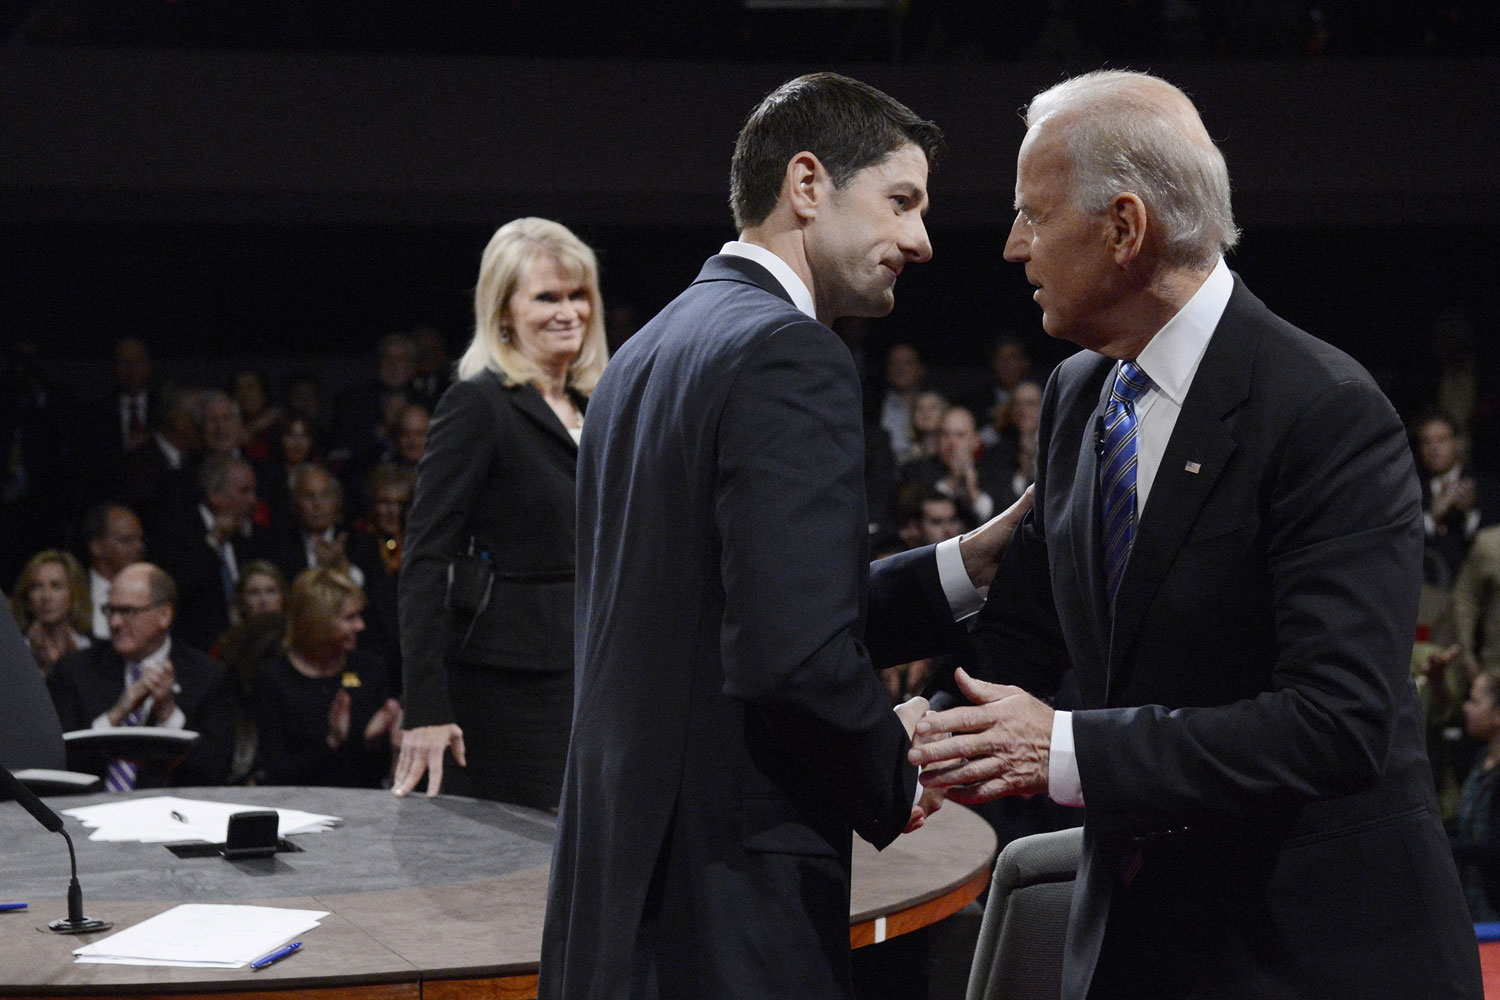 Oct. 11, 2012. Vice-President Joe Biden shakes hands with Republican Vice-President nominee Paul Ryan at the Vice-Presidential debate at Centre College in Danville, Ky.